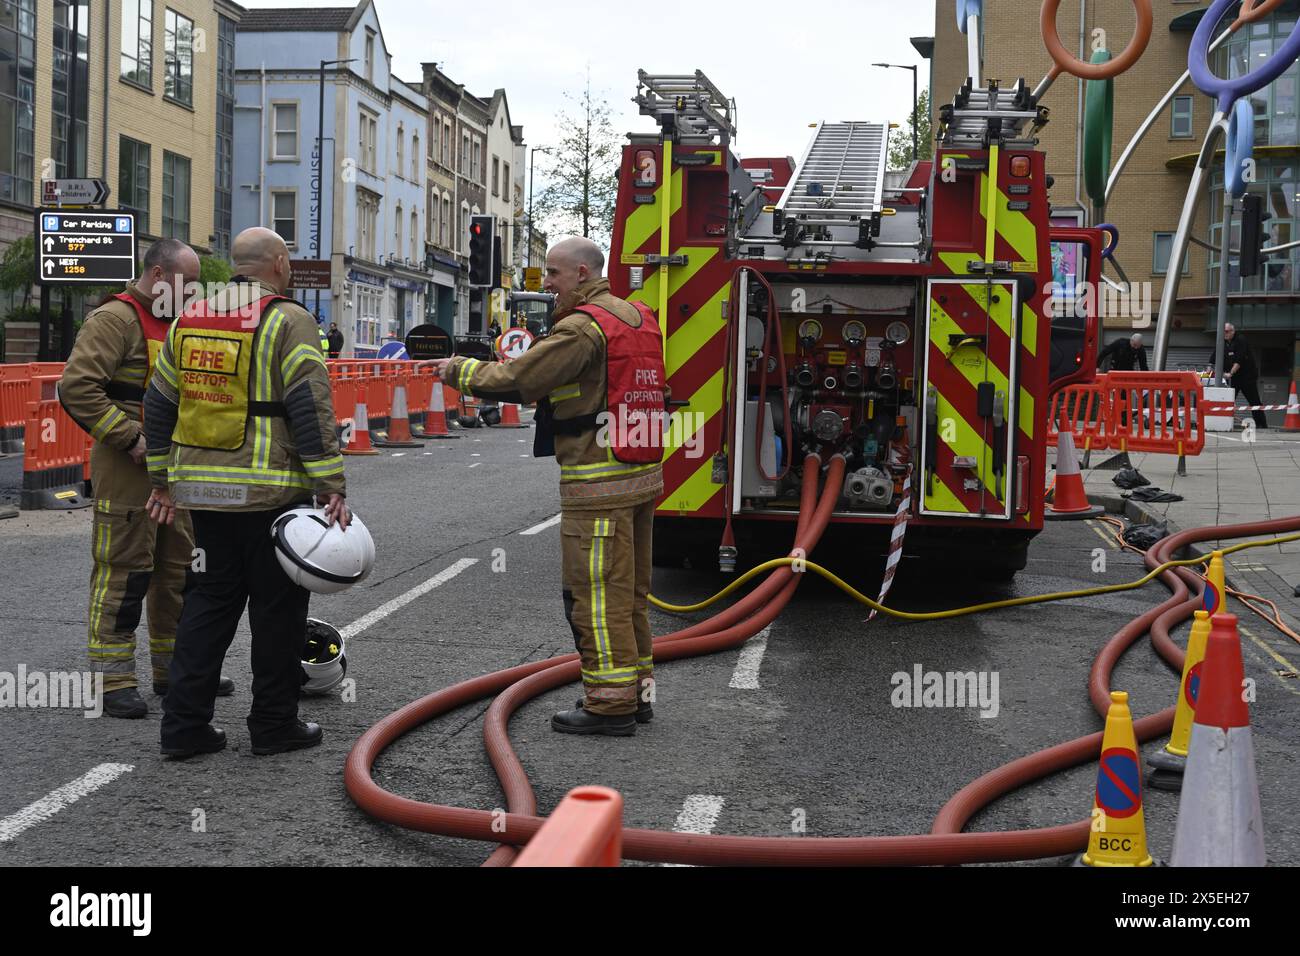 Major incident at Bristol Royal Infirmary hospital with multiple fire engines and police when small fire due to electrical fault happened, UK Stock Photo